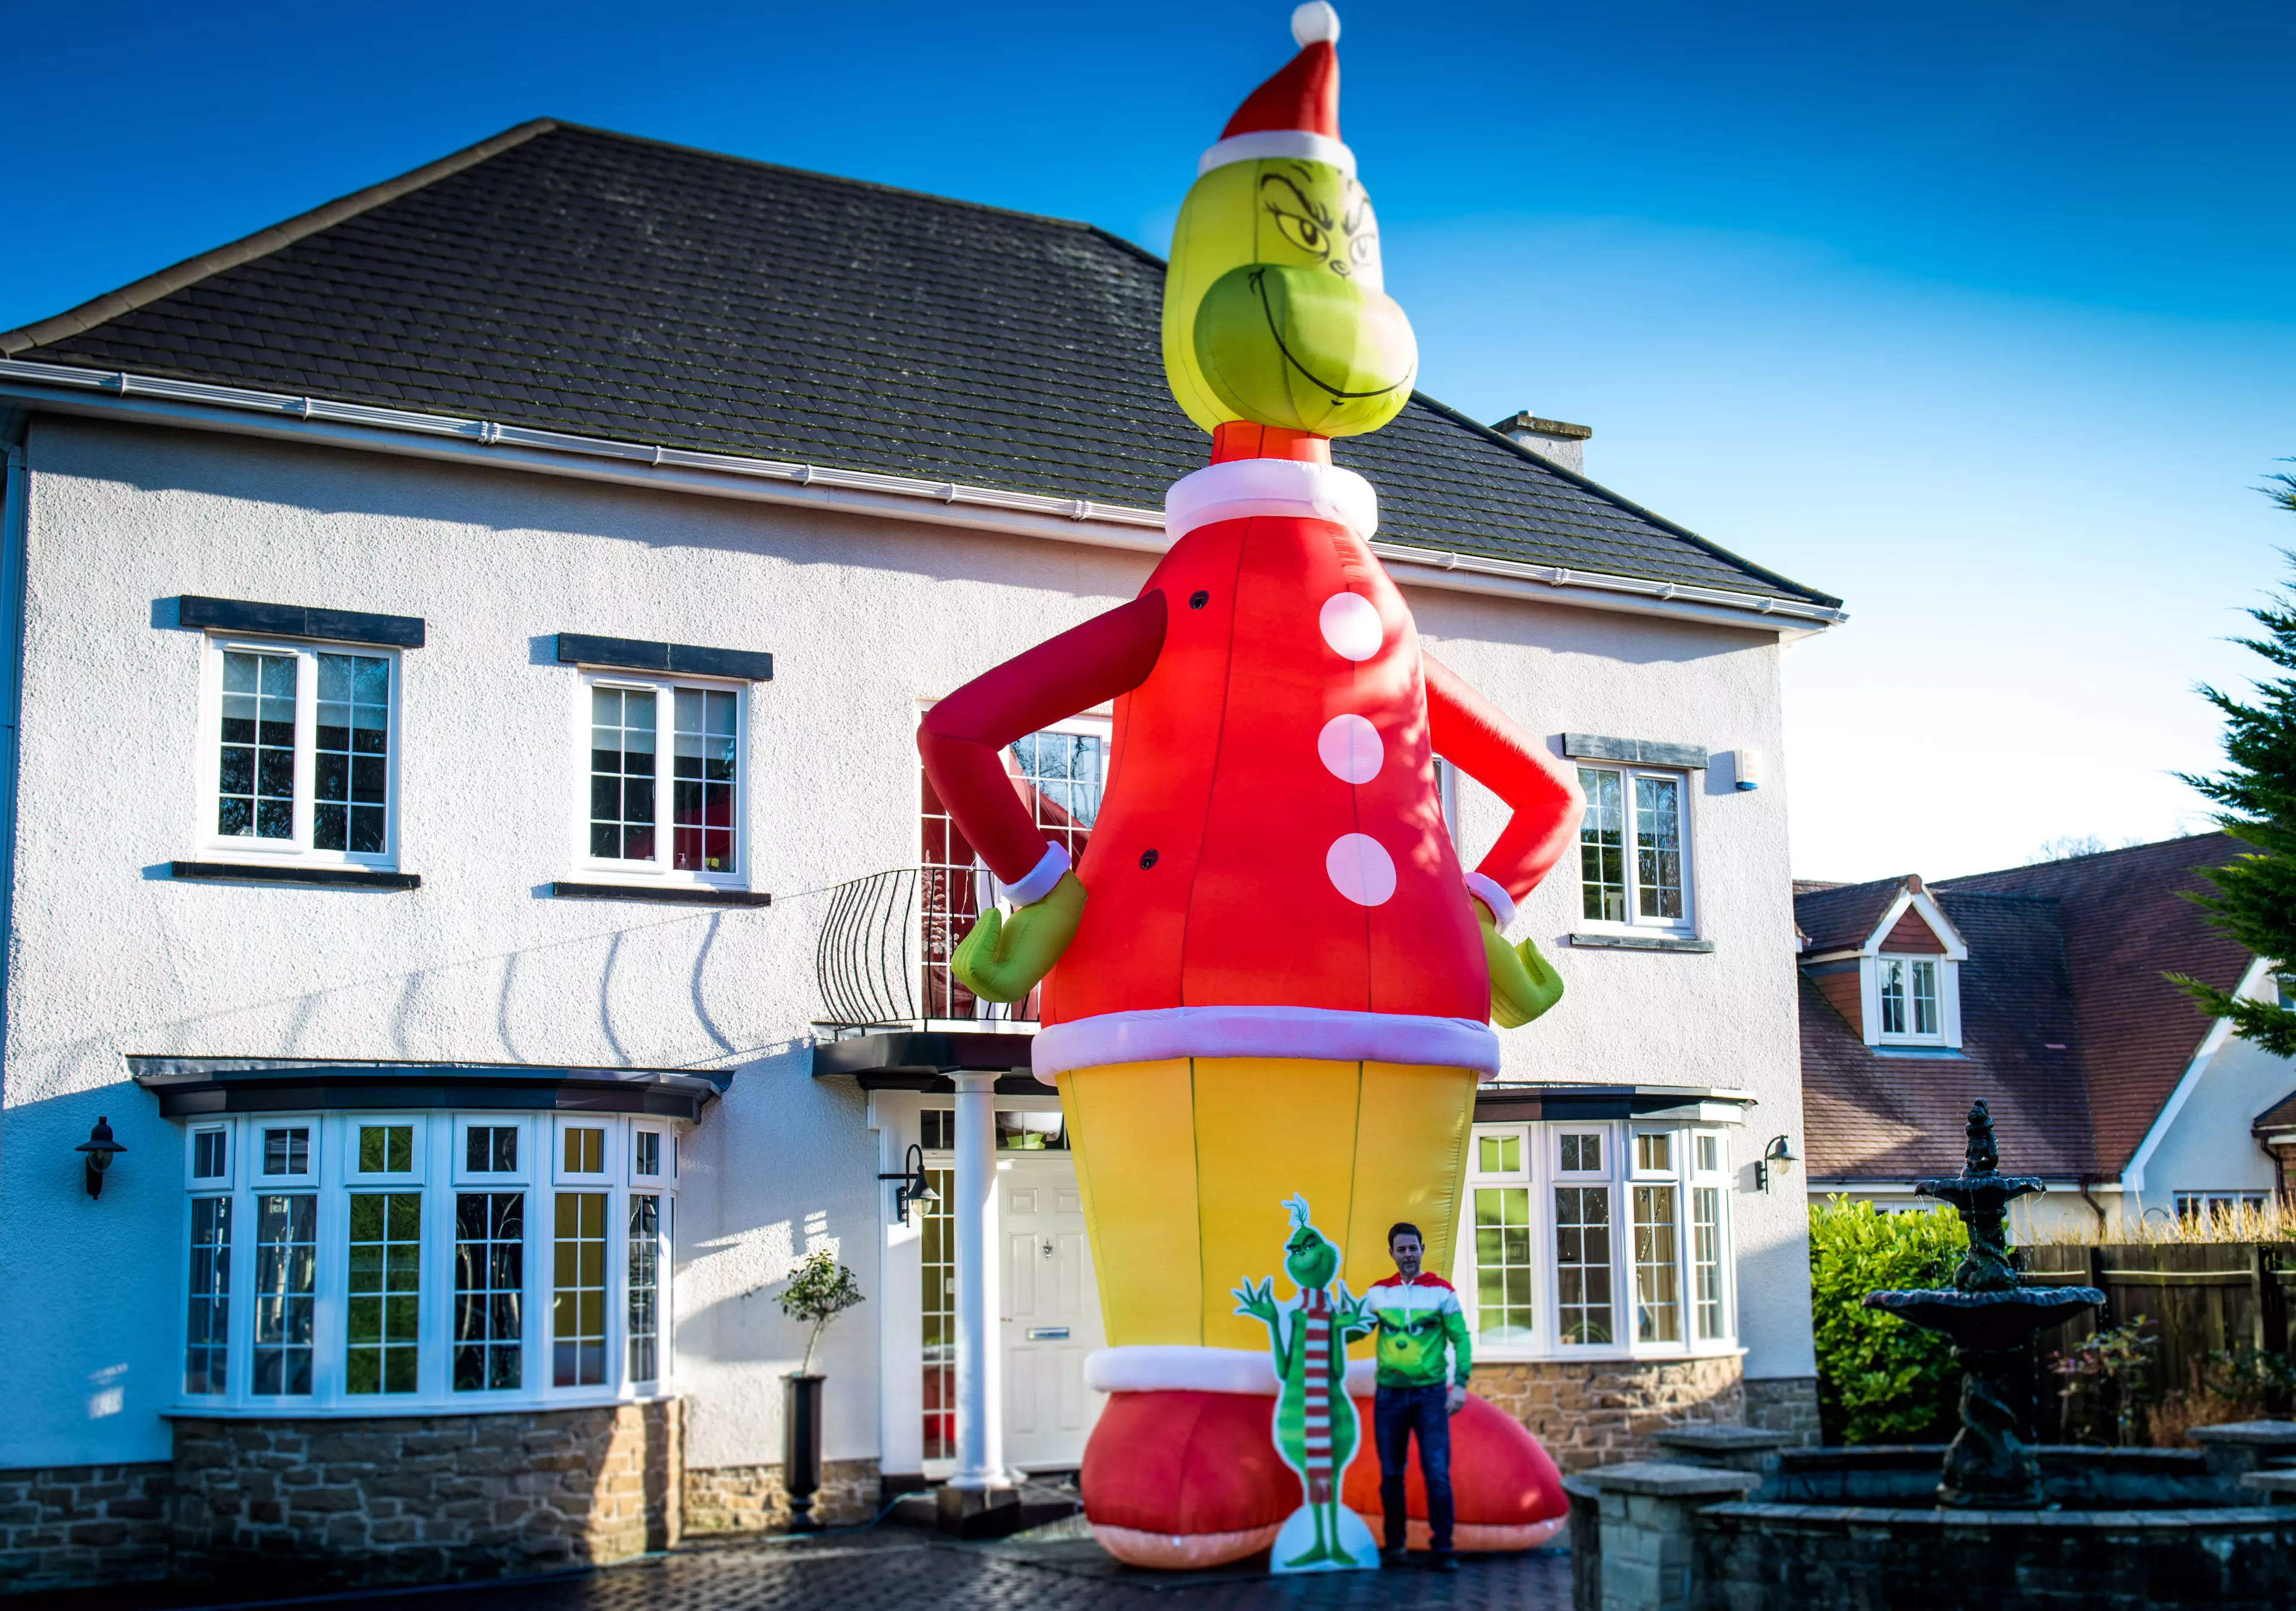 The 35ft inflatable Grinch has attracted a lot of attention and Ray is going to raise money for his local hospice (